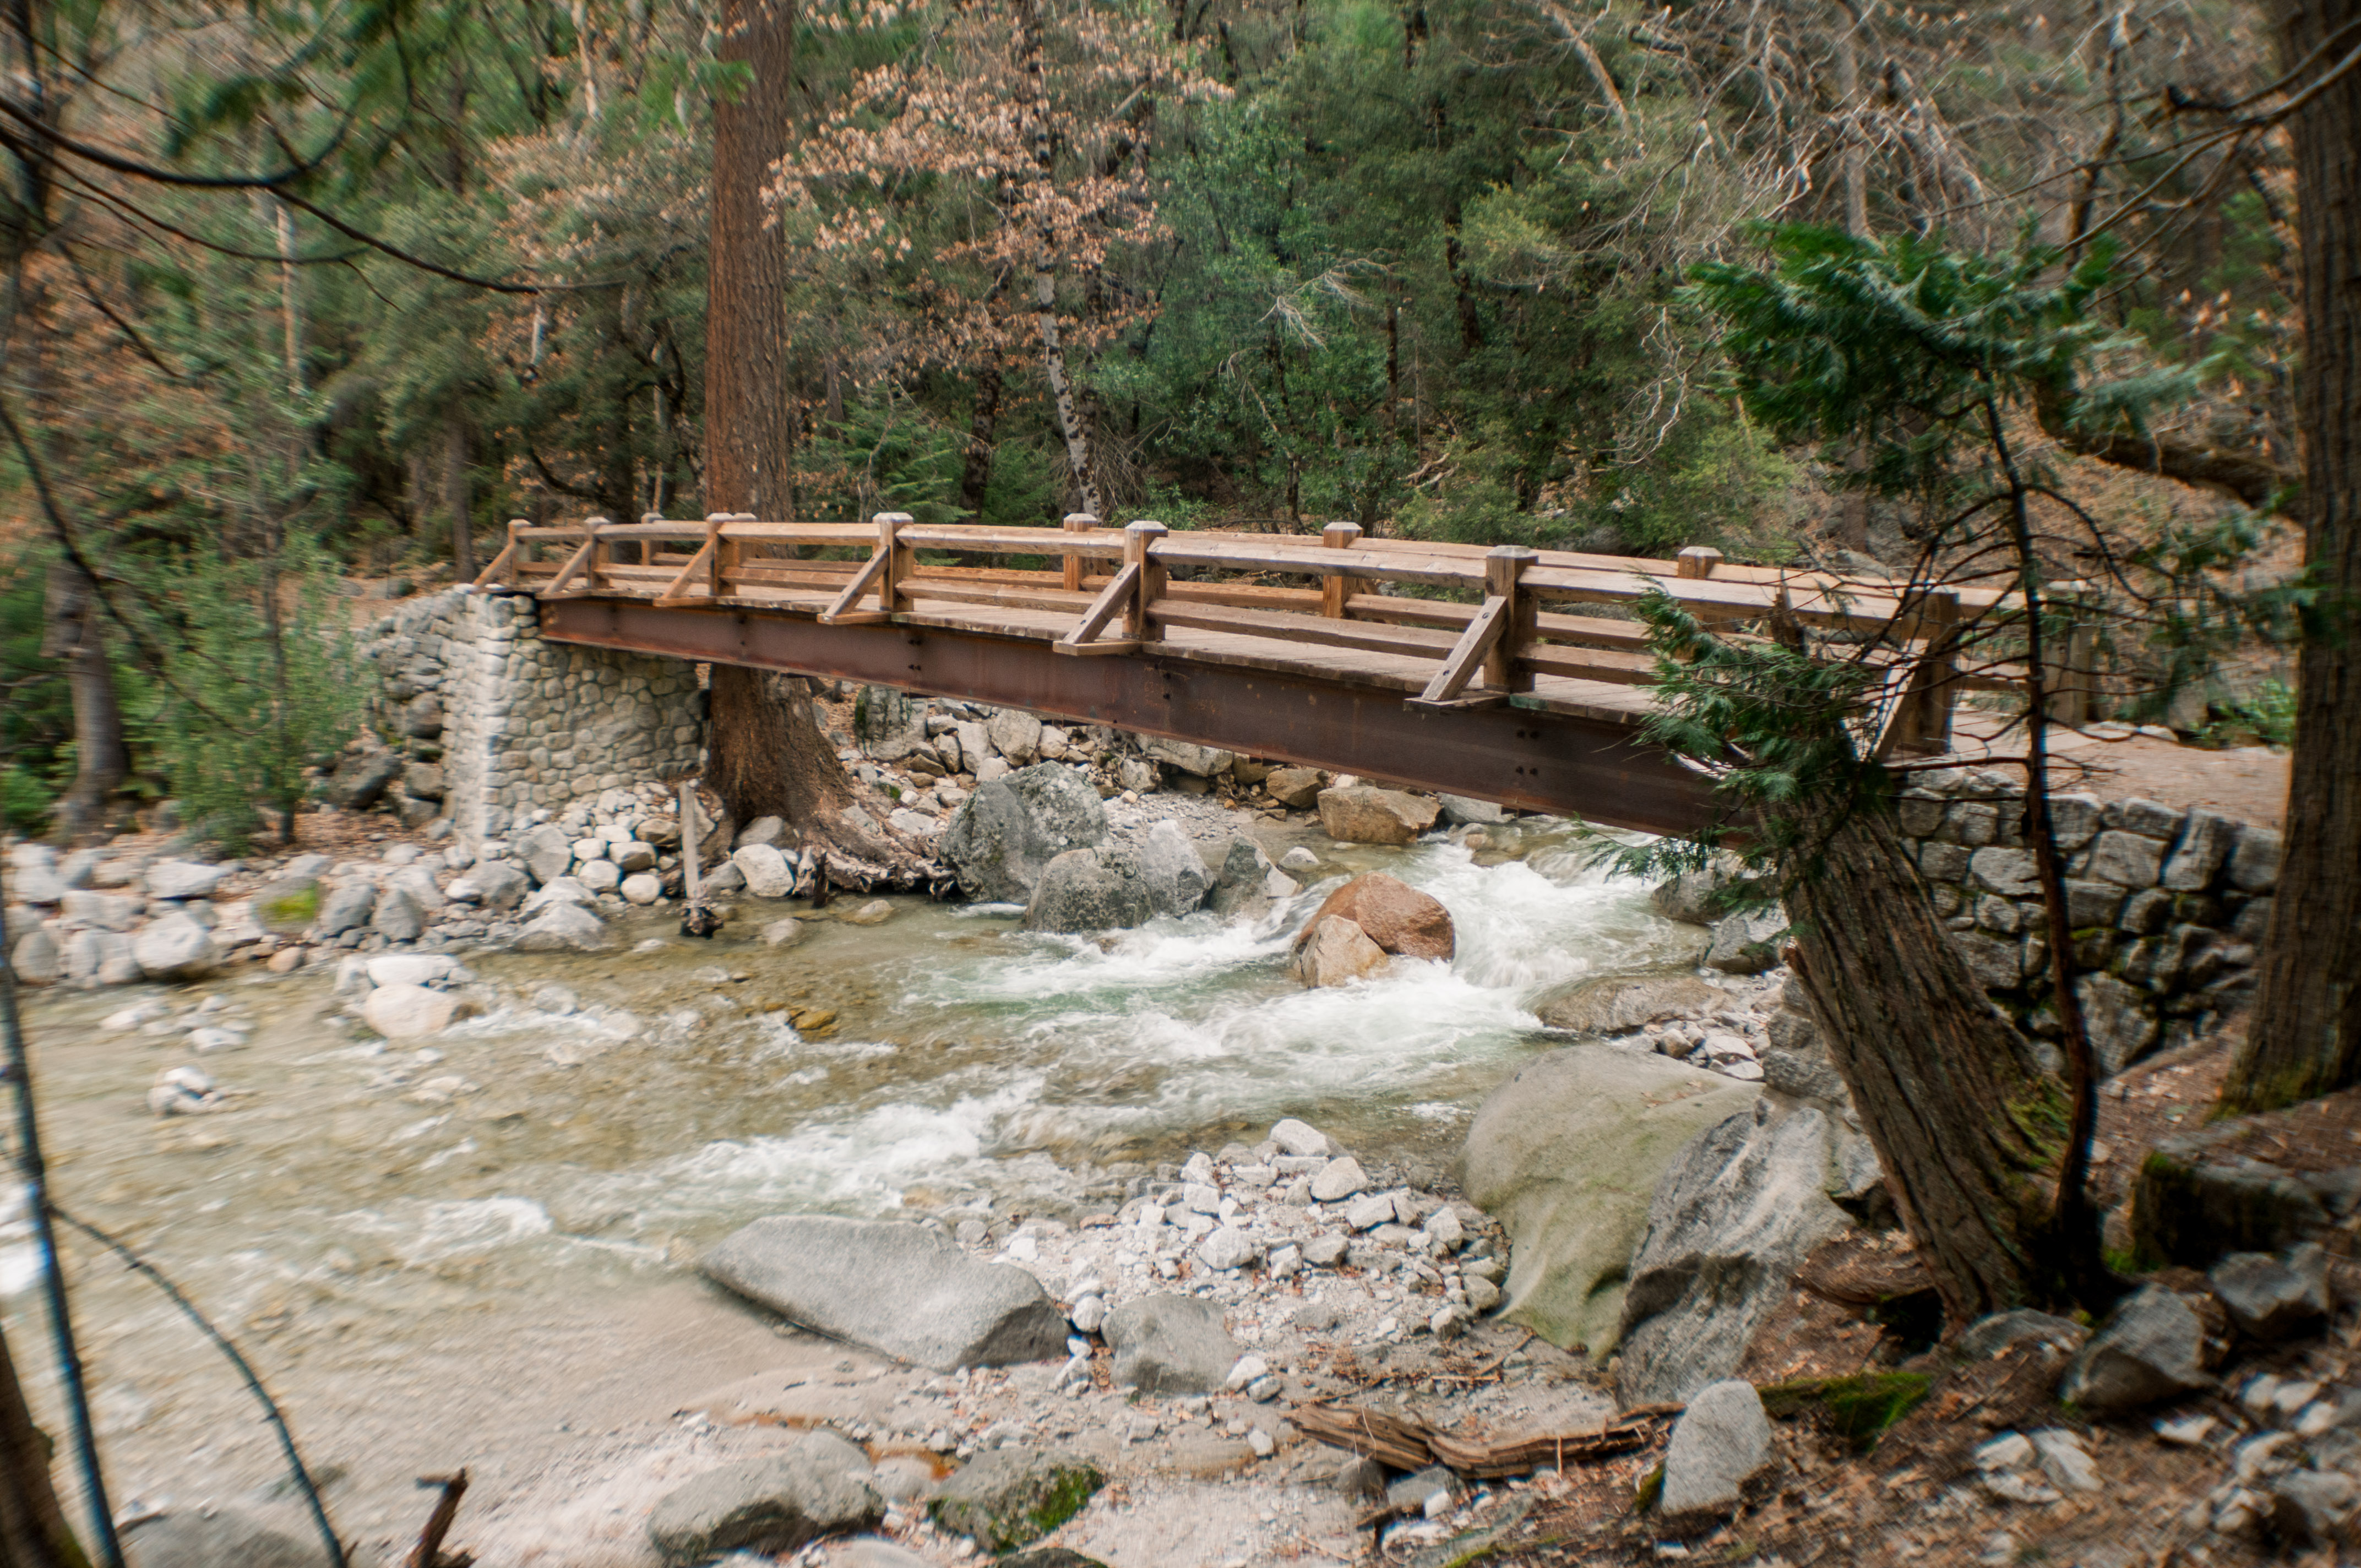 A Bridge near Mirror Lake in Yosemite National Park in California in the United States.  A bridge with slow flowing water underneath it.  The water is clear and running from higher up on the mountains.